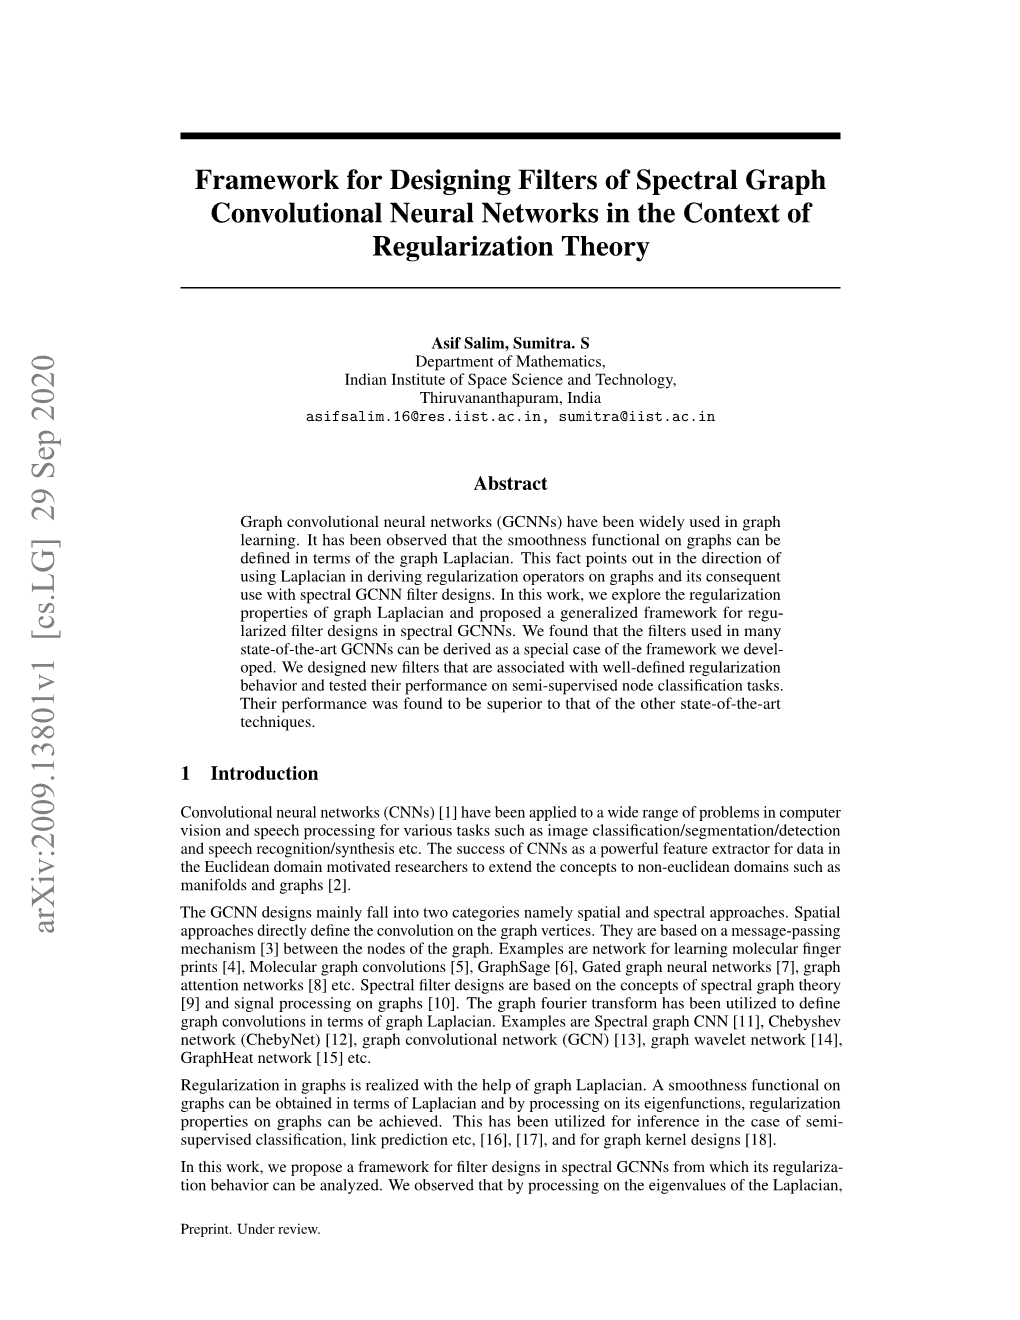 Framework for Designing Filters of Spectral Graph Convolutional Neural Networks in the Context of Regularization Theory